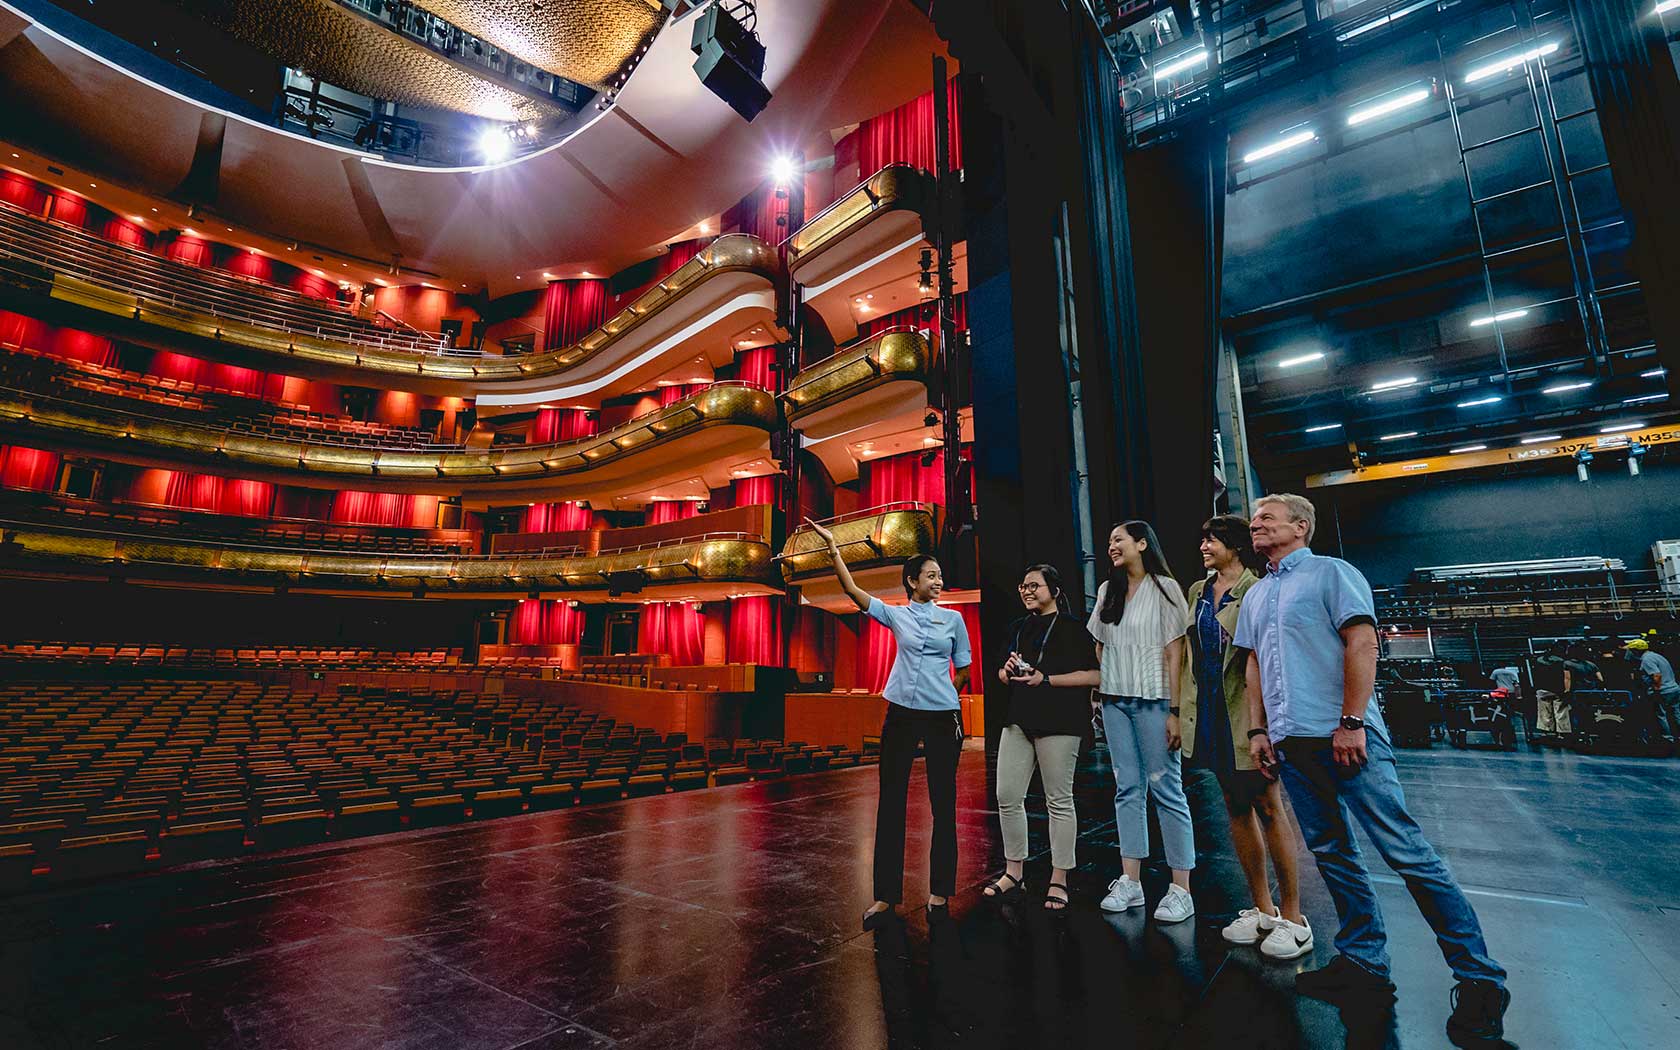 Image of participants on the Esplanade Theatre stage during a guided tour.